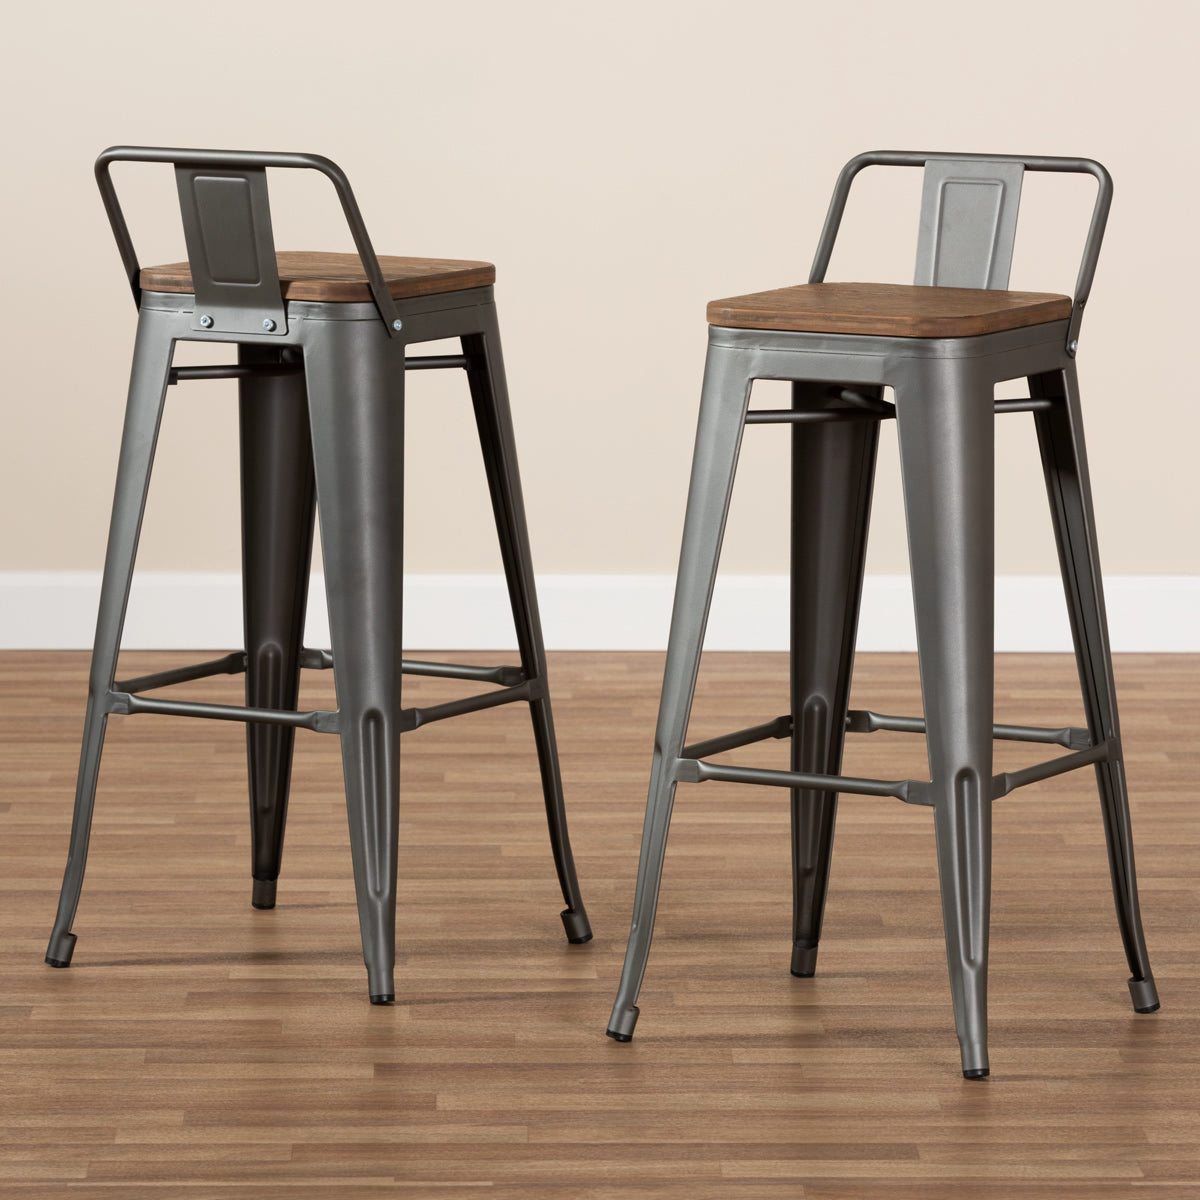 Baxton Studio Henri Vintage Rustic Industrial Style Tolix-Inspired Bamboo and Gun Metal-Finished Steel Stackable Bar Stool with Backrest Set Baxton Studio-Bar Stools-Minimal And Modern - 6